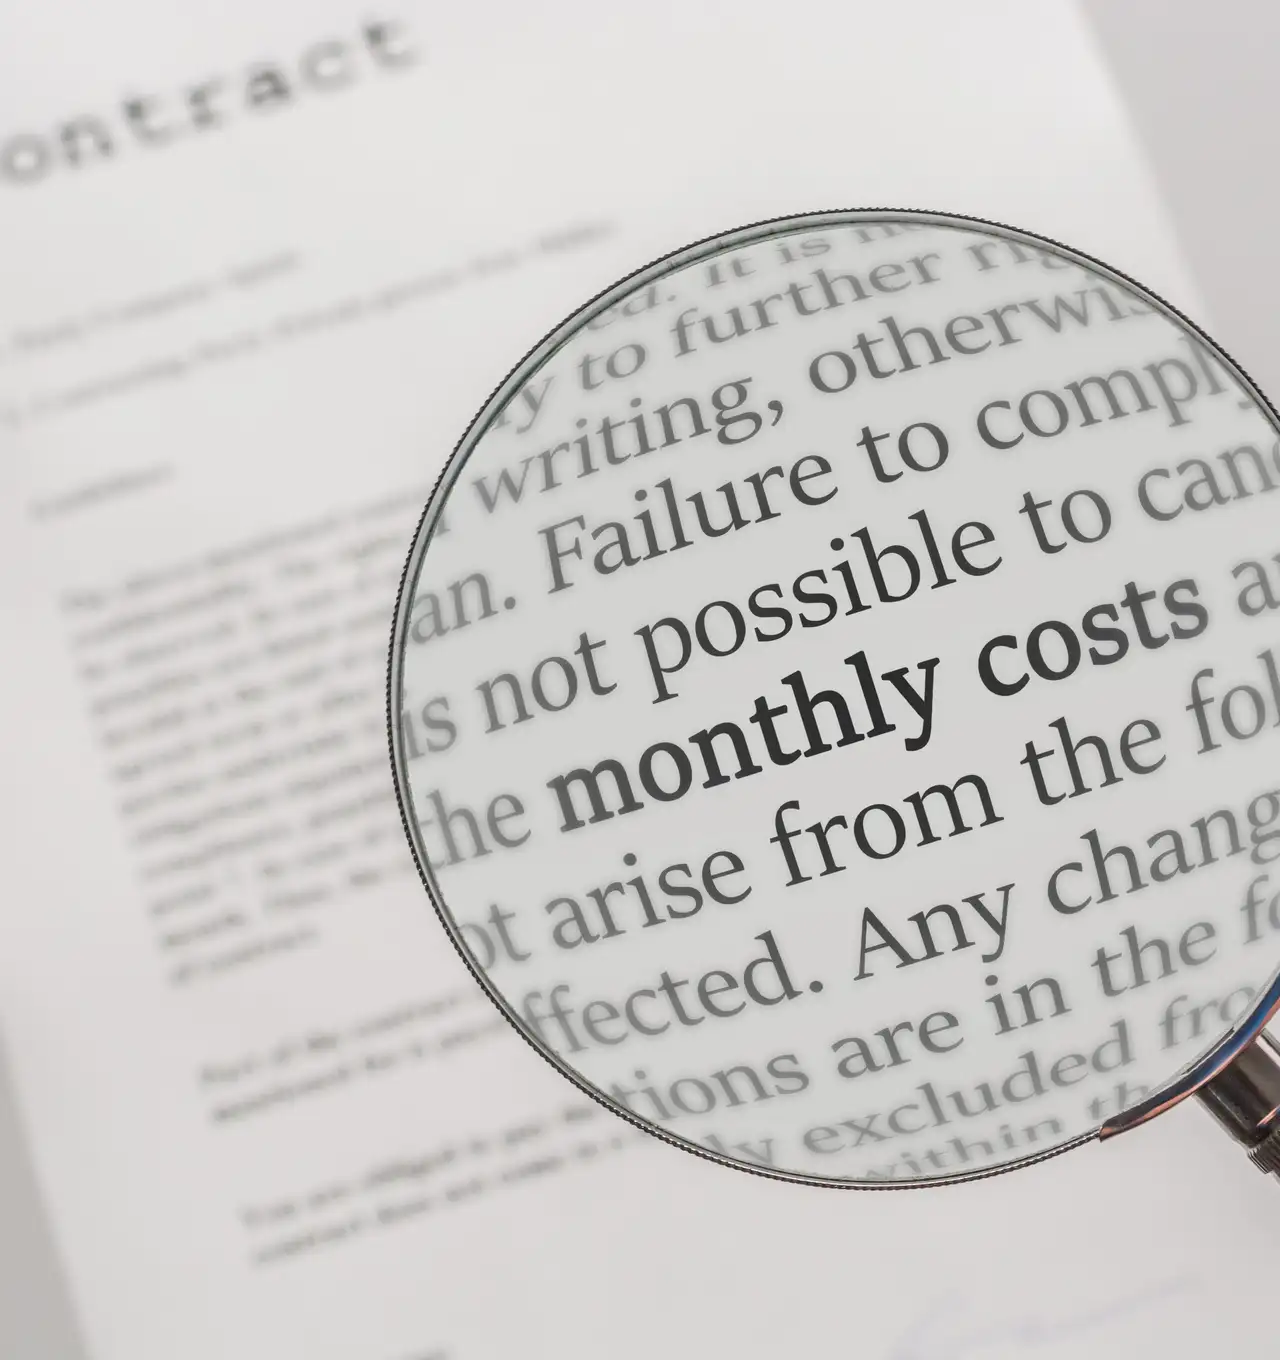 Contract - through the magnifying glass.jpg